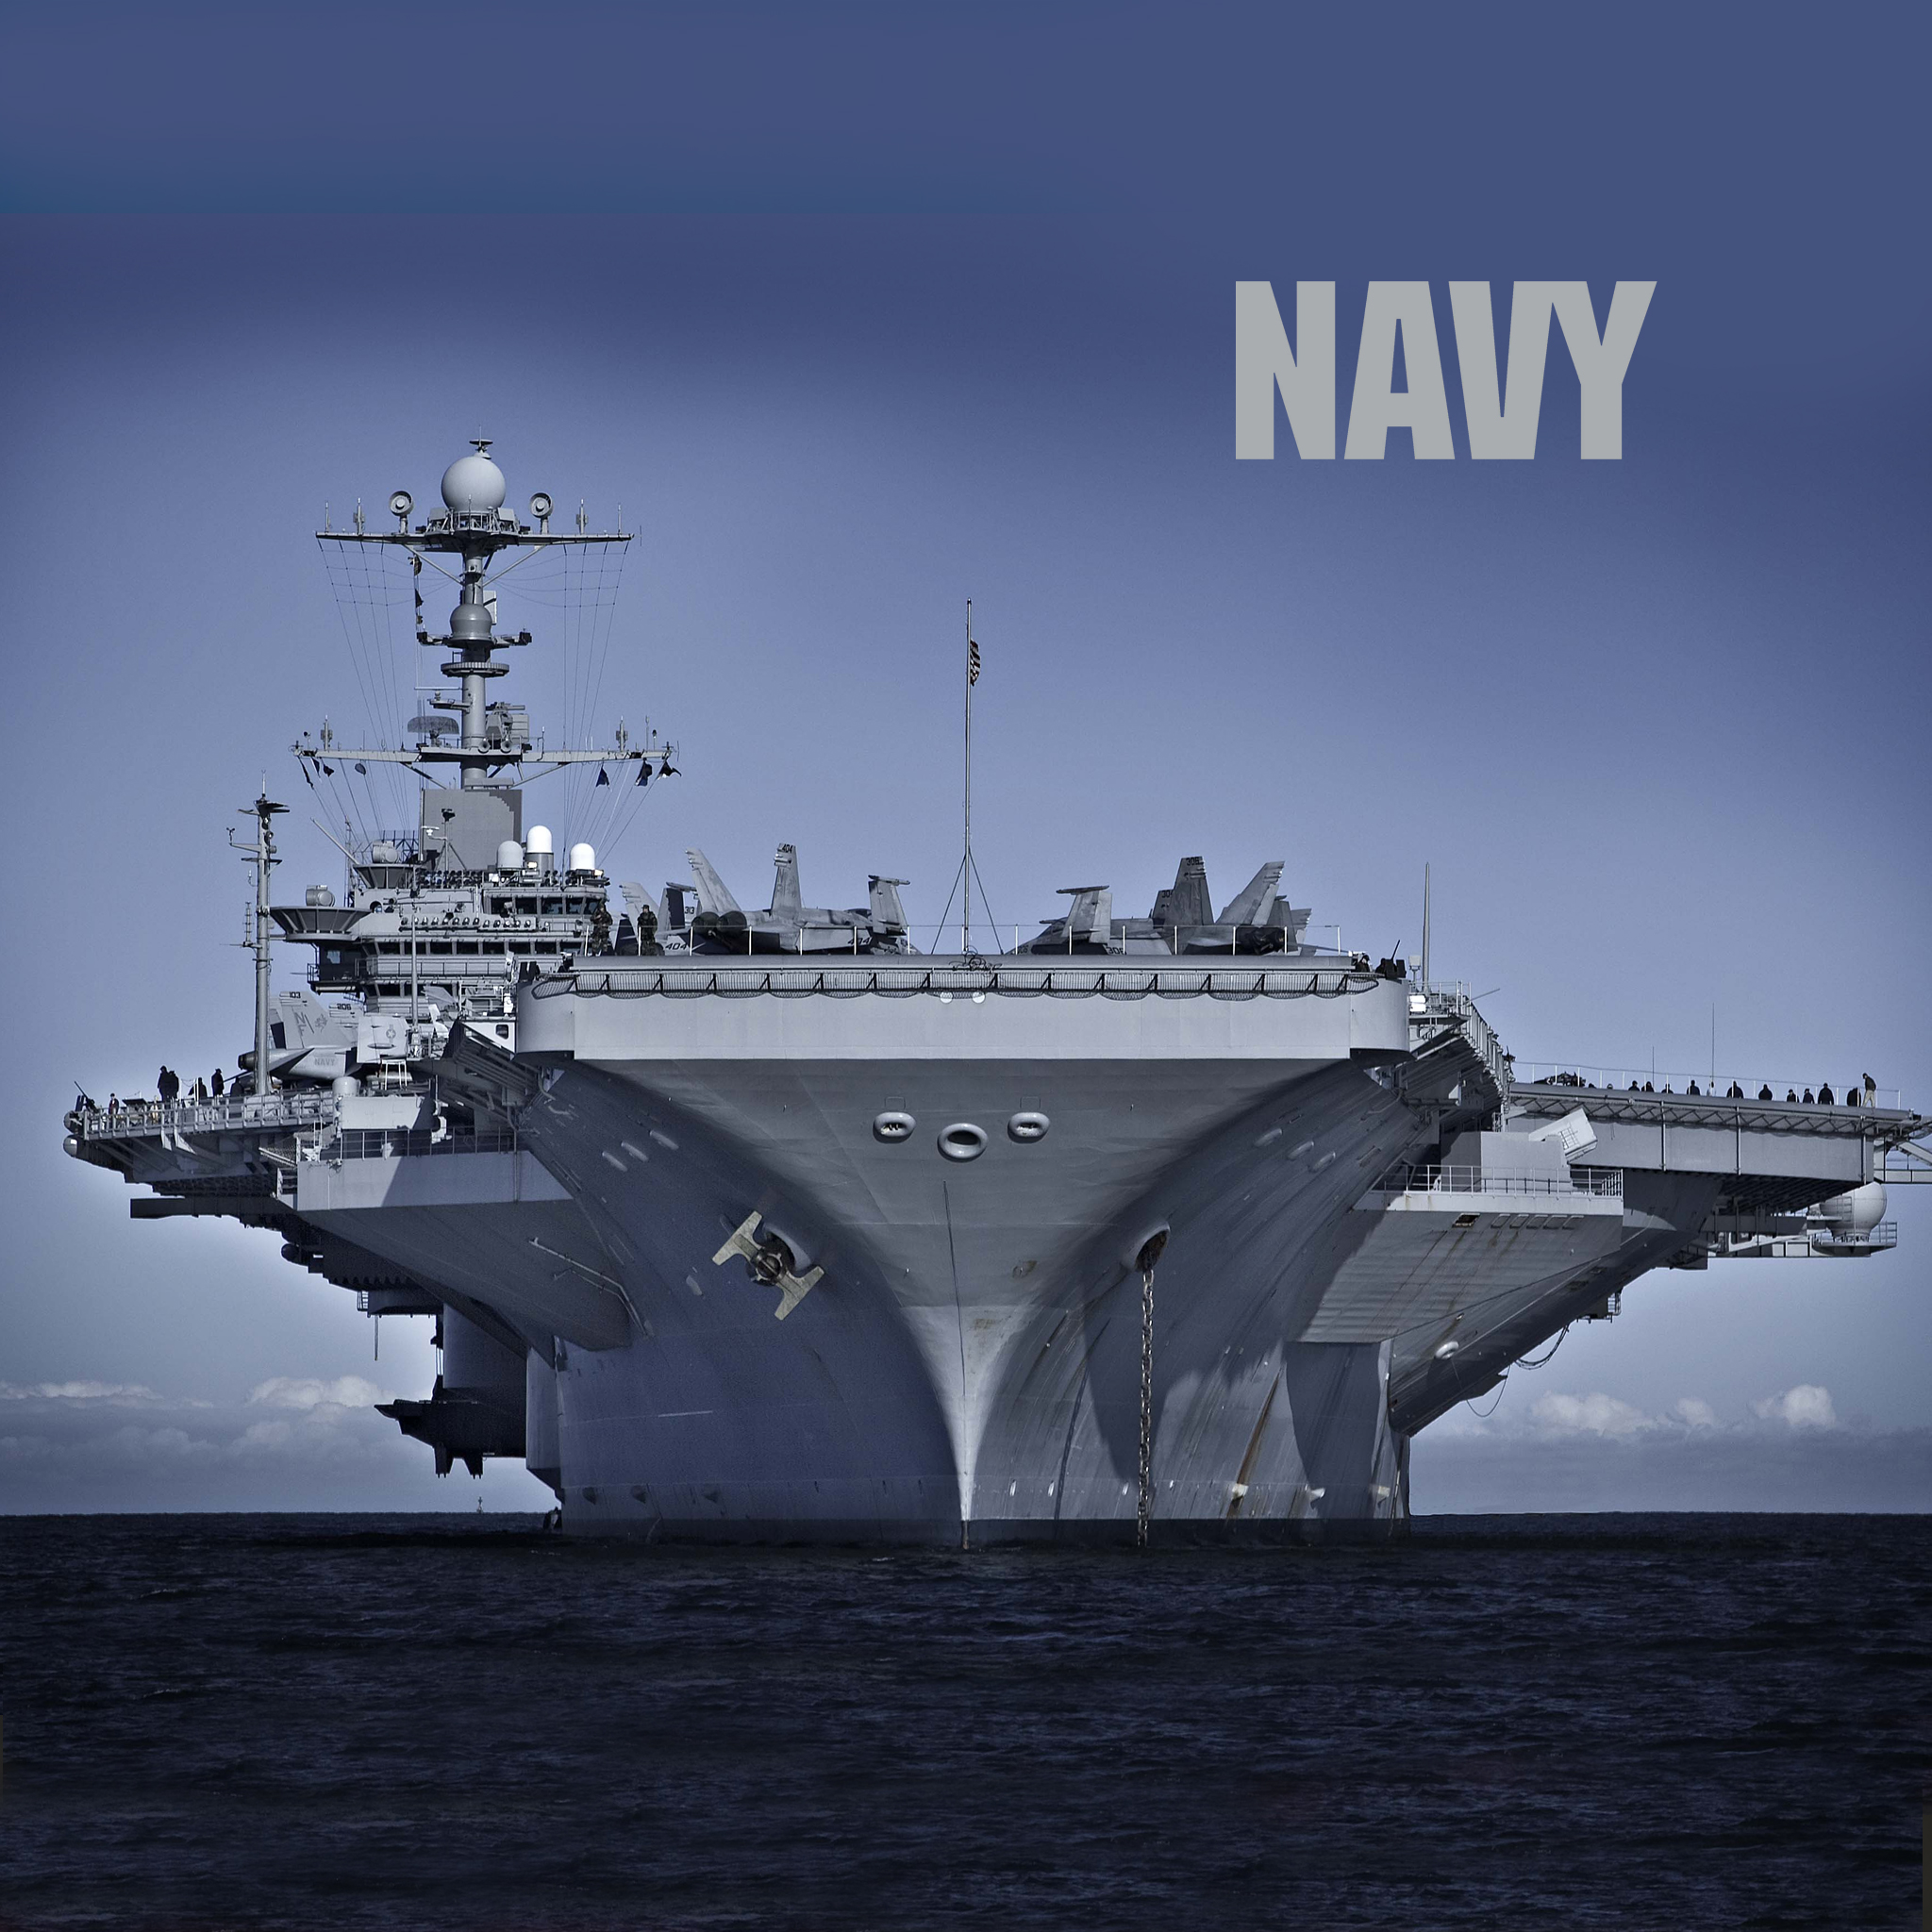 US Navy Wallpaper for your New iPad with Retina Display 2048x2048